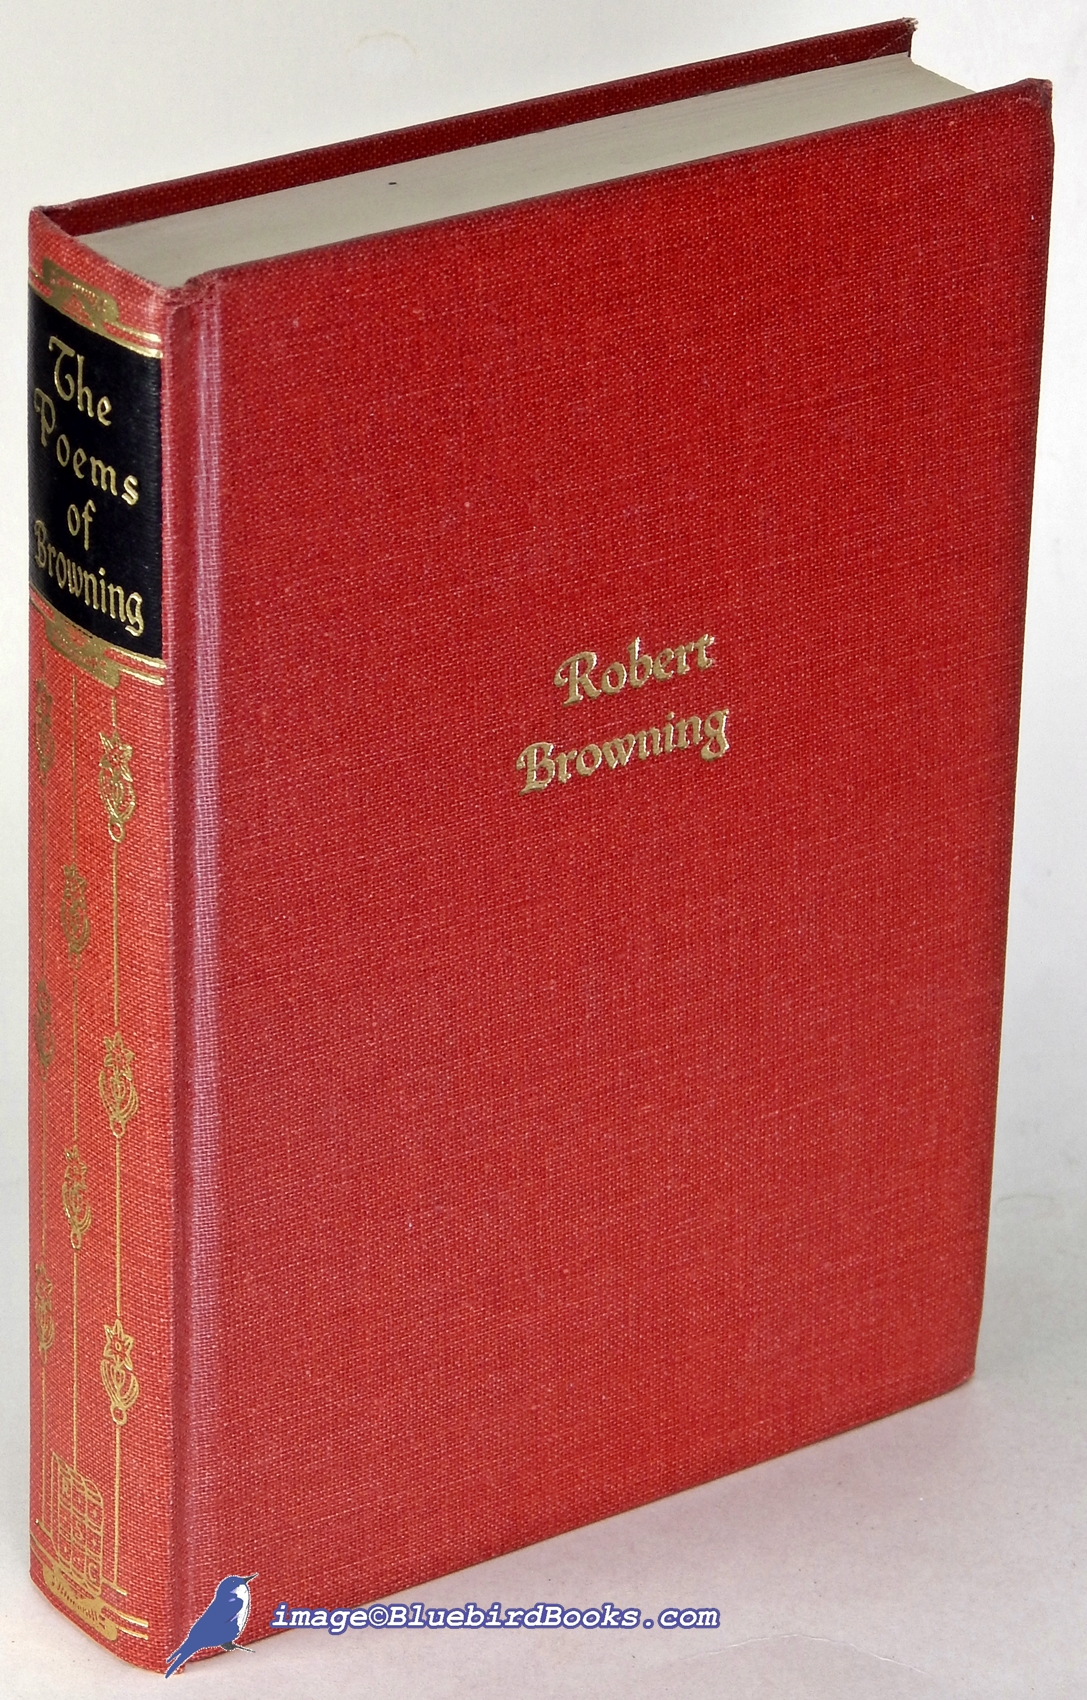 BROWNING, ROBERT - The Poems of Robert Browning